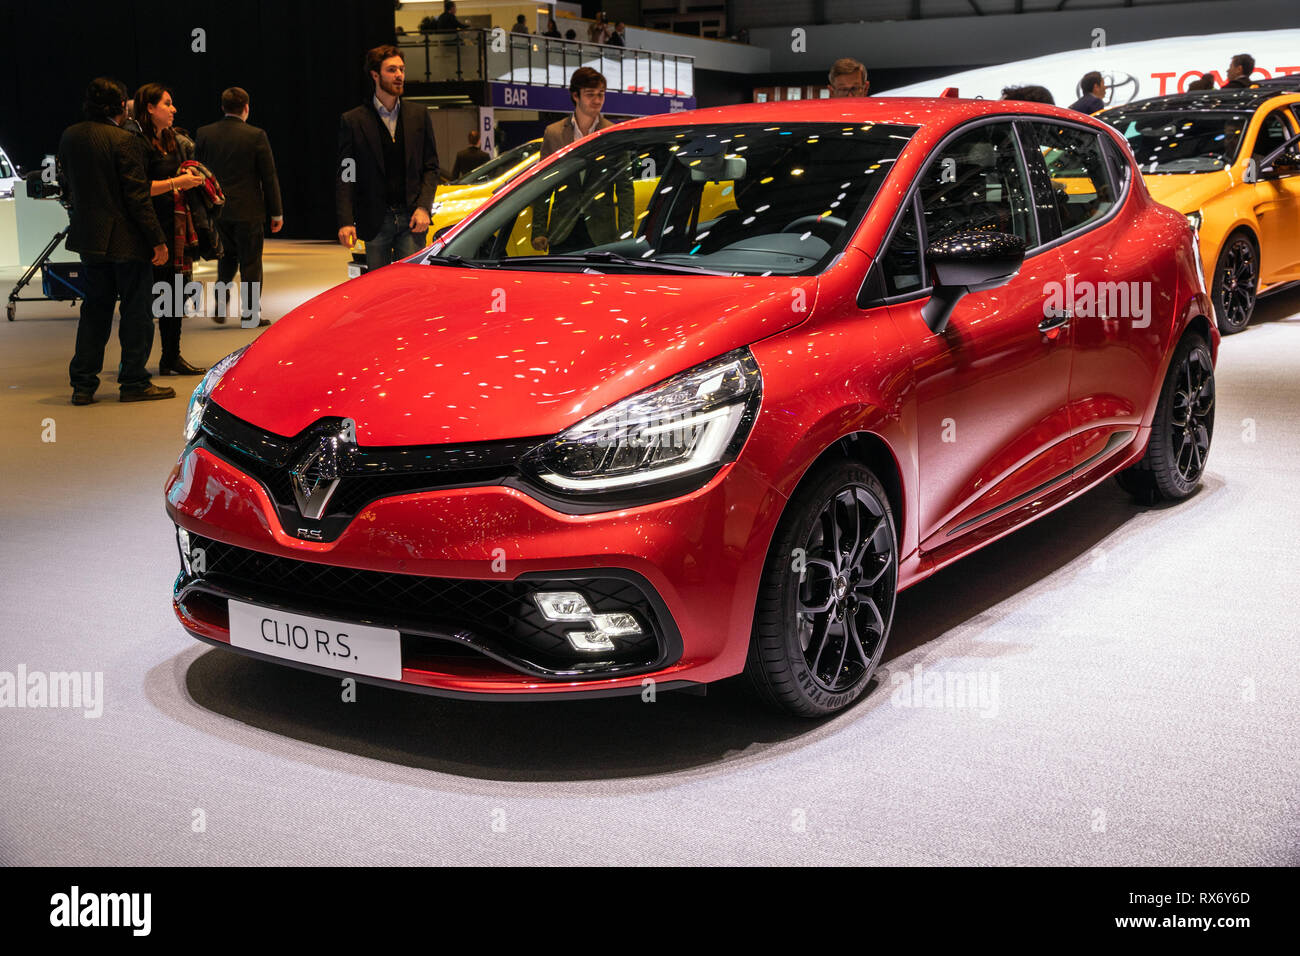 2018 red clio hi-res stock photography - Alamy